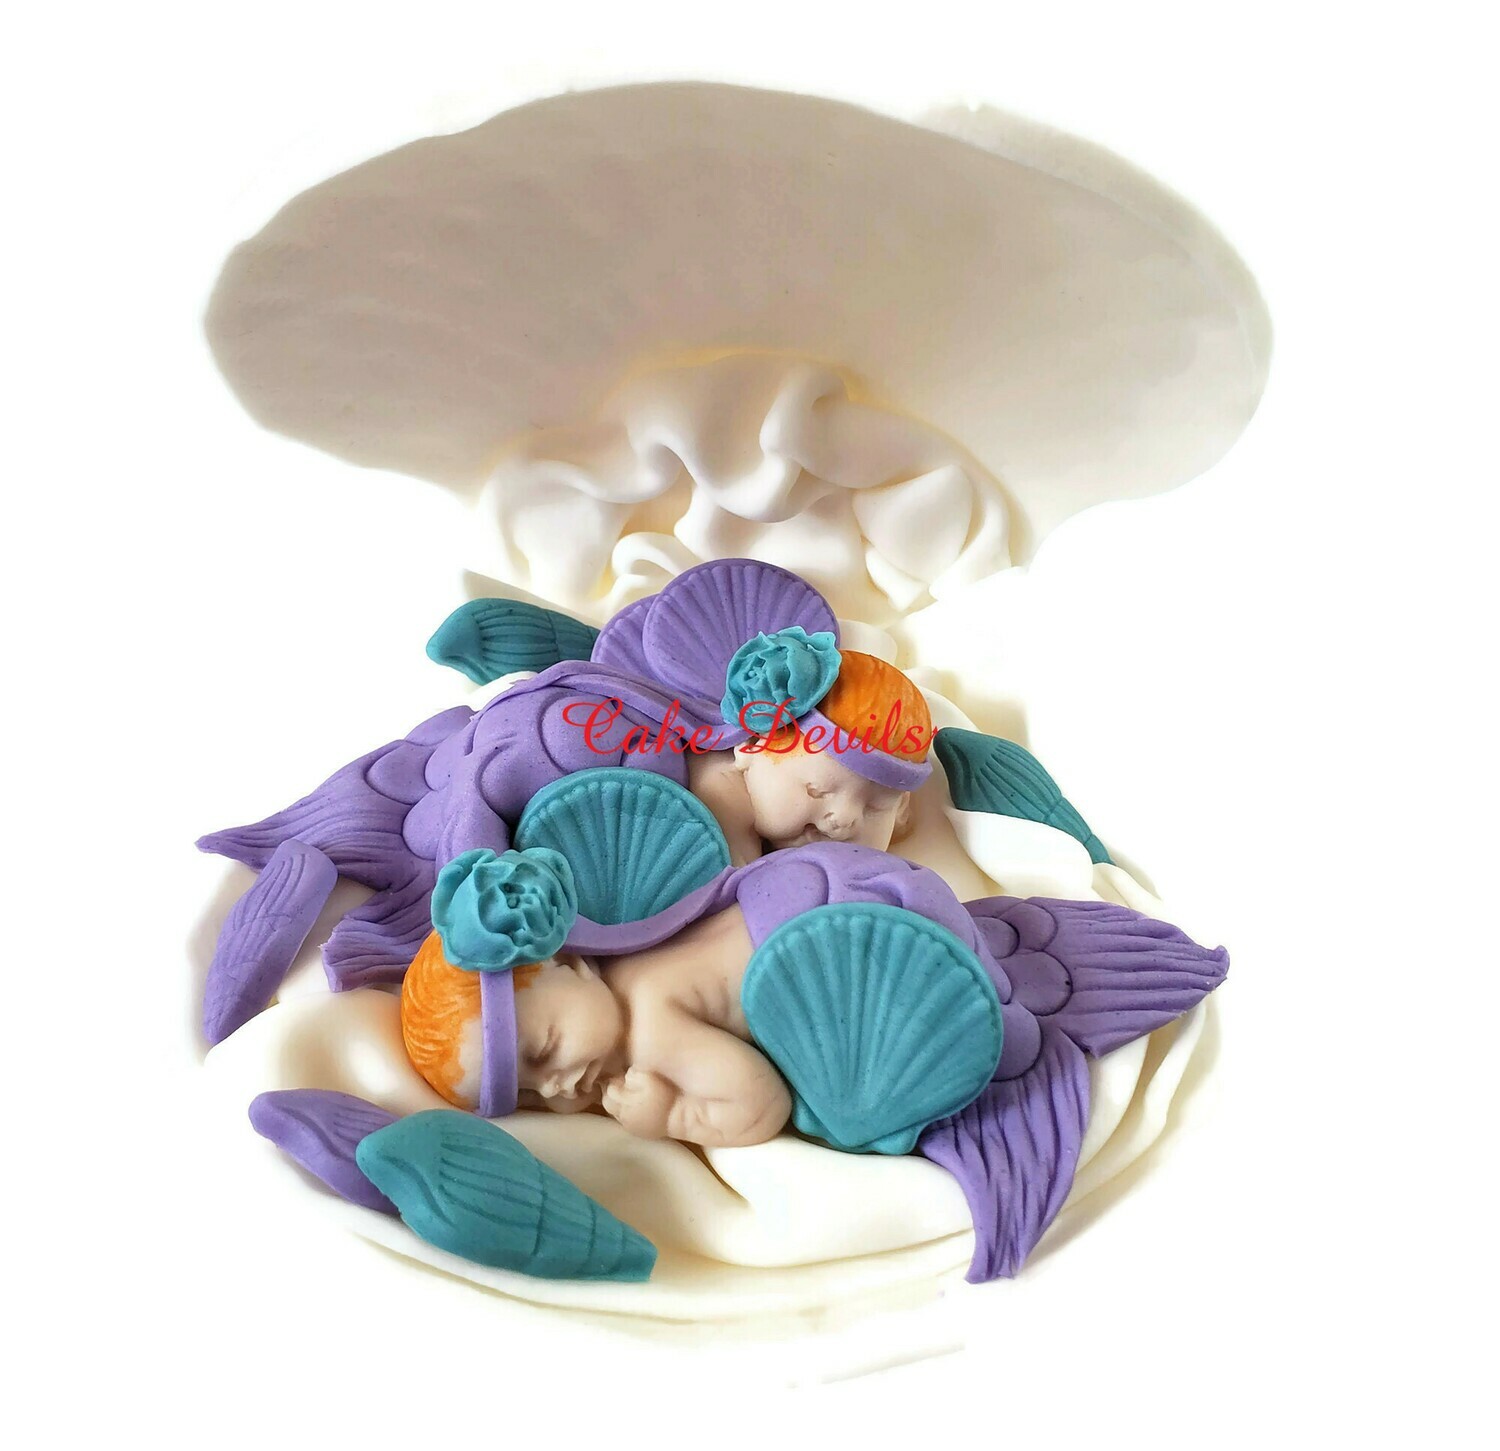 Twins Mermaid Baby Shower, Twin Fondant Mermaids in a Clam shell Cake Topper, Cake Decorations, Sleeping Baby Mermaid, Under the Sea cake